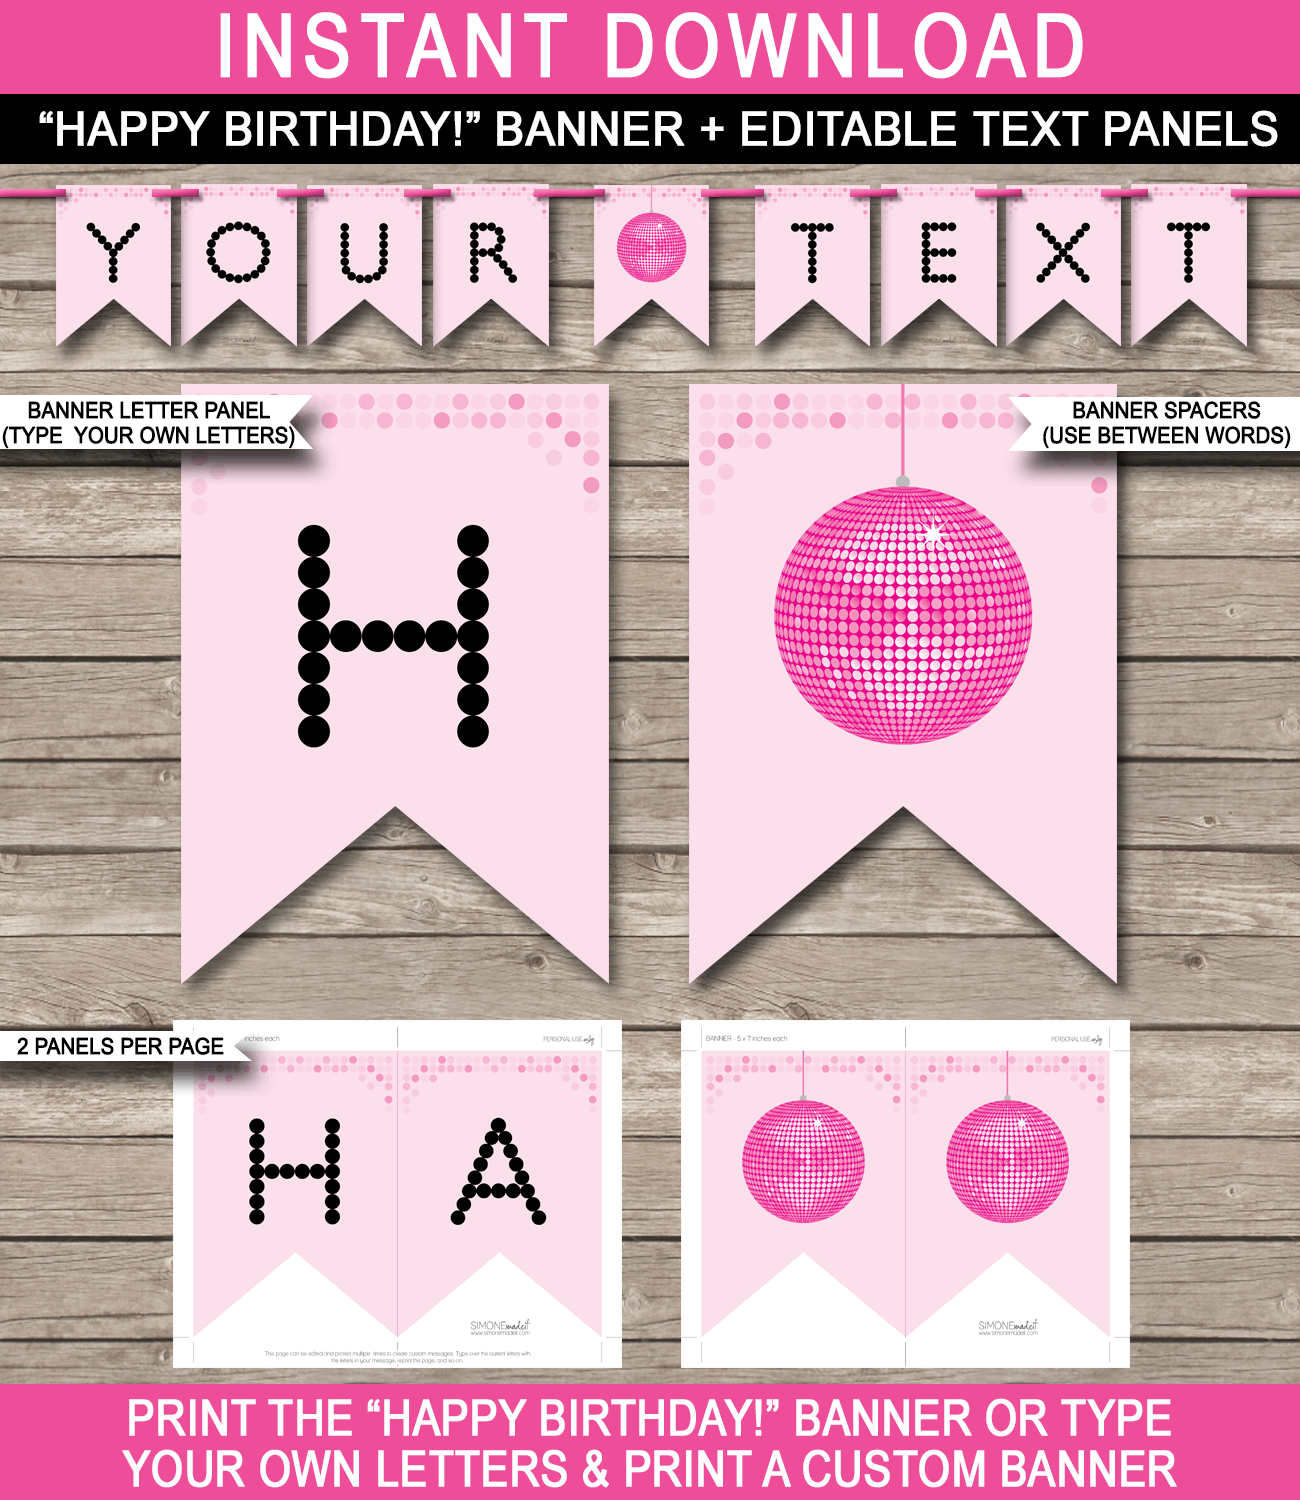 Dance Party Banner Template - Disco Bunting - Disco Party Banner - Happy Birthday Banner - Birthday Party - Editable and Printable DIY Template - INSTANT DOWNLOAD $4.50 via simonemadeit.com